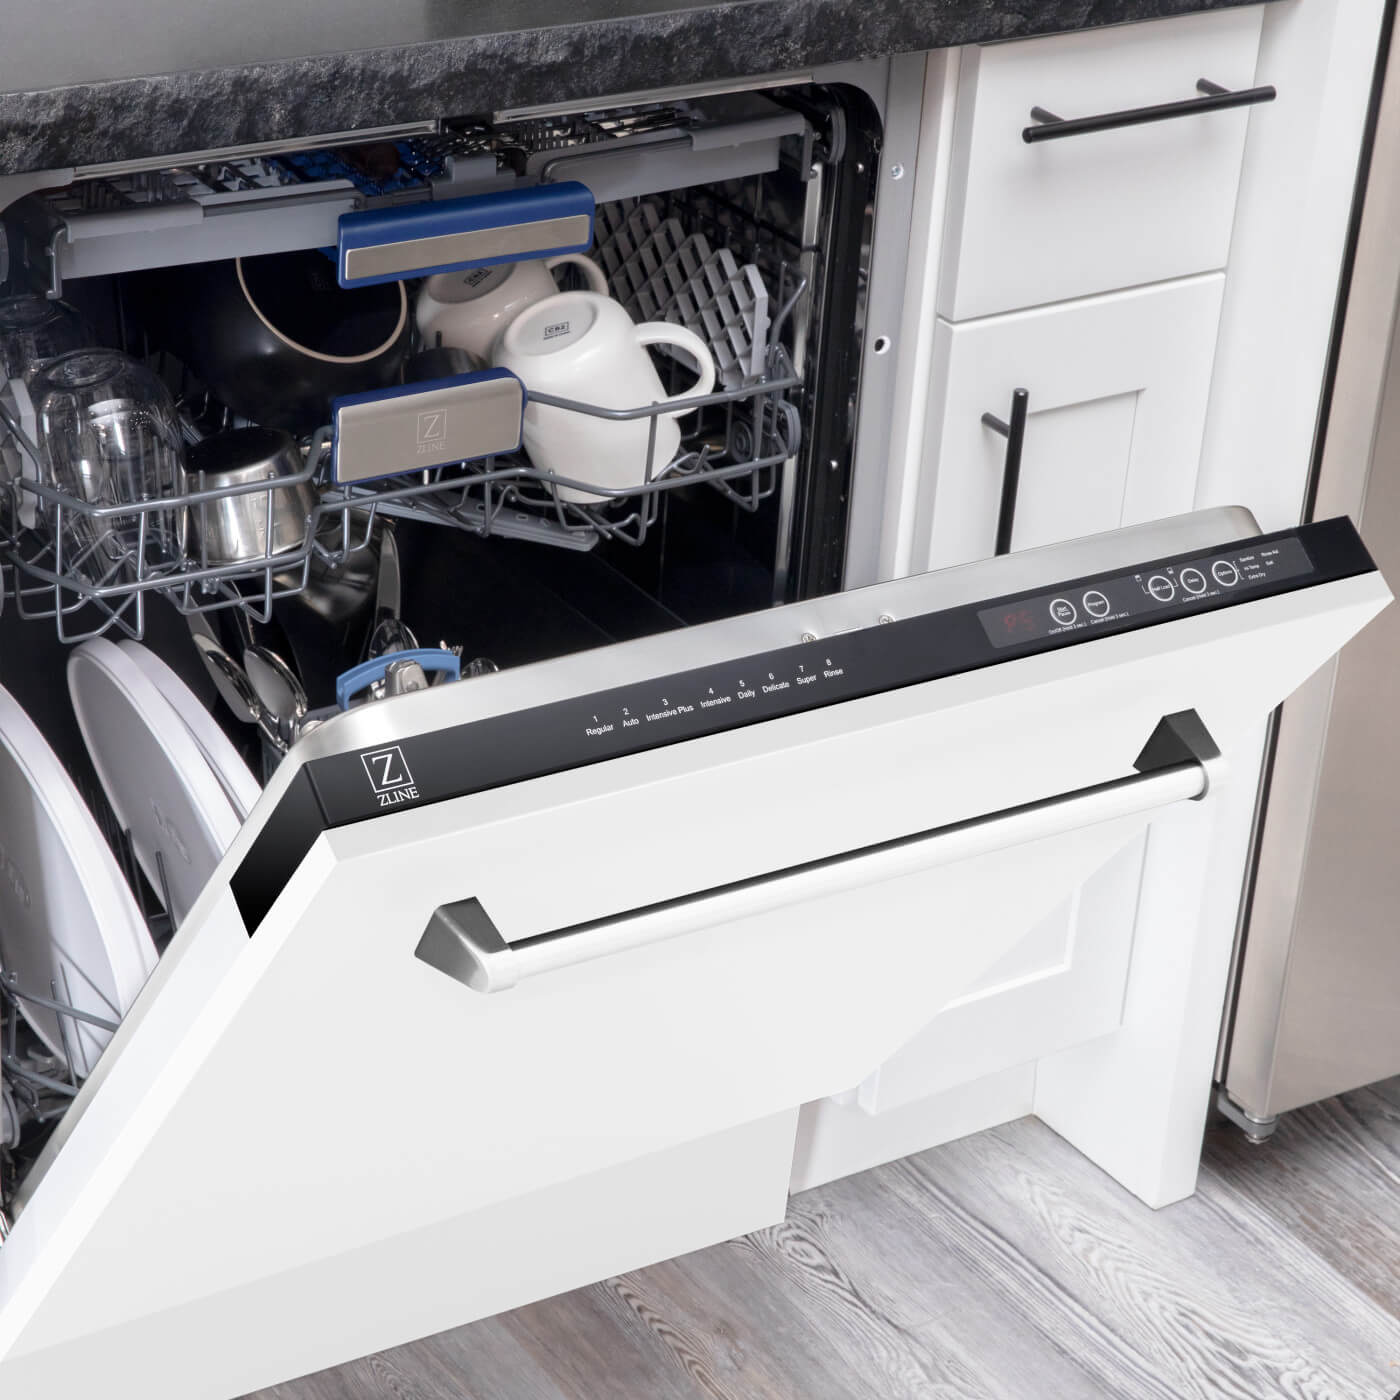 An open ZLINE matte white dishwasher, model DWV-WM-24, revealing a loaded interior with dishes and cups, integrated seamlessly into a kitchen with white cabinets and dark handles, combining practicality with a sleek, modern design.